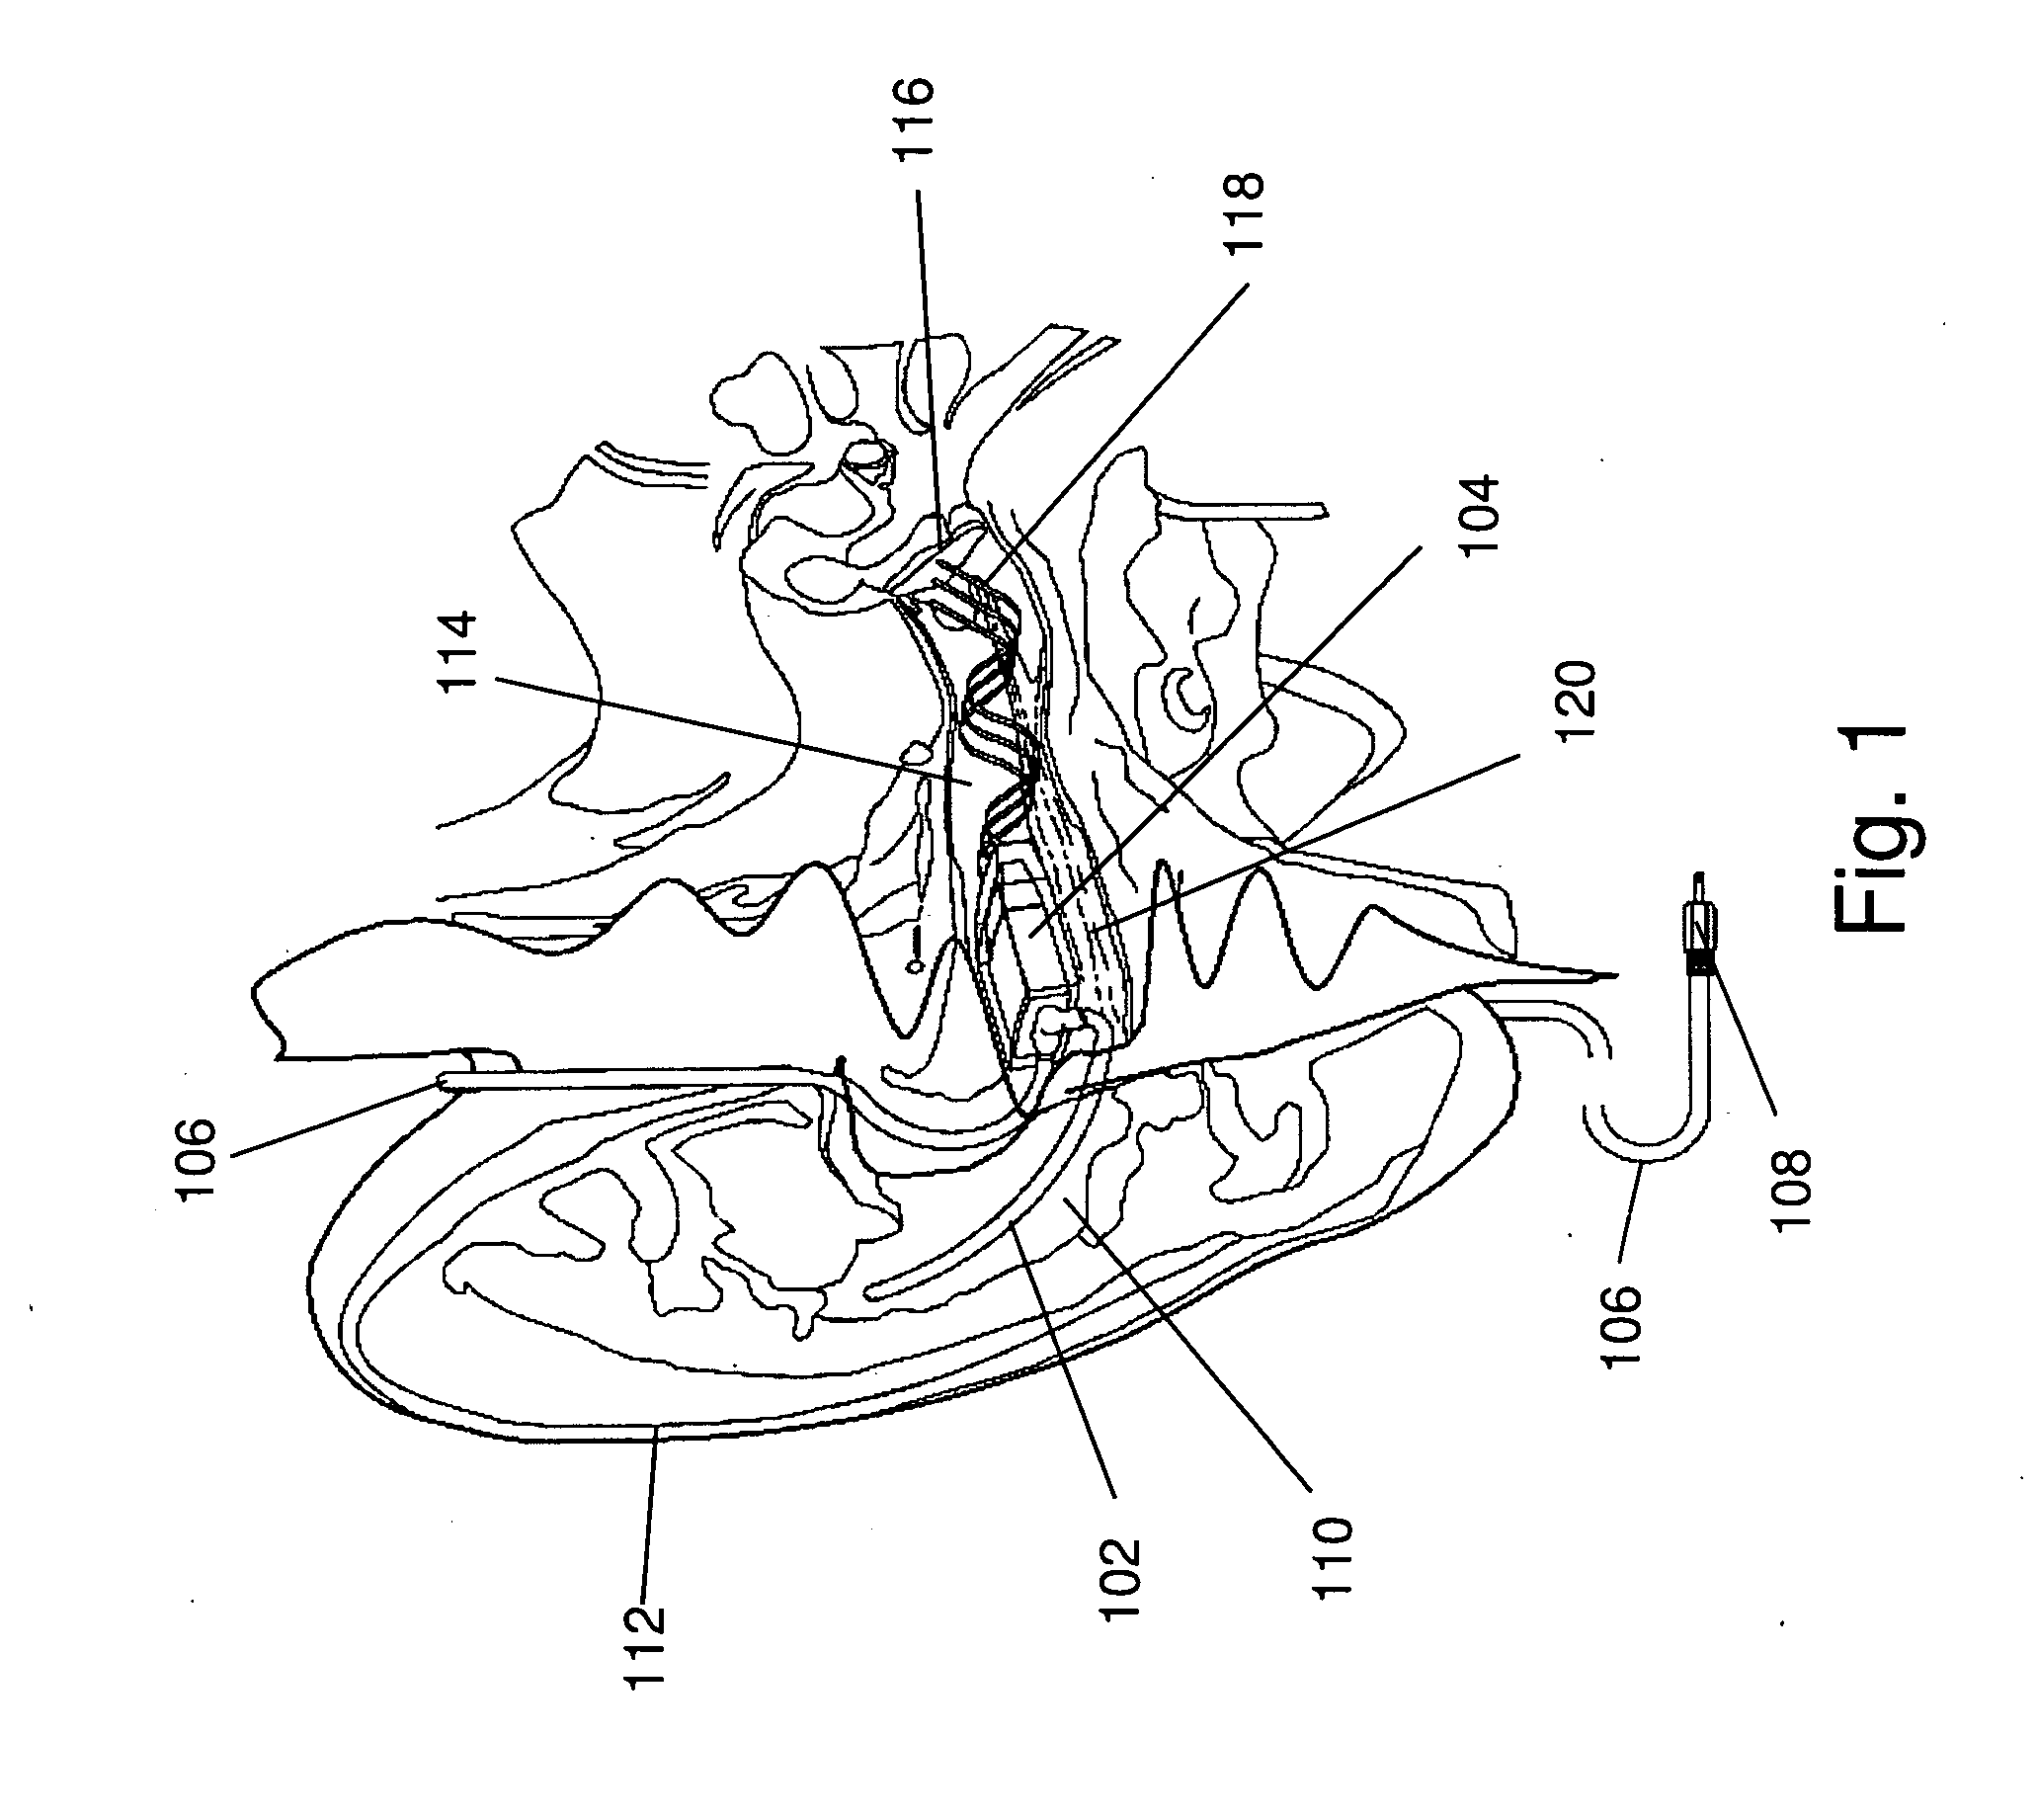 Non-Occluding Audio Headset Positioned in the Ear Canal